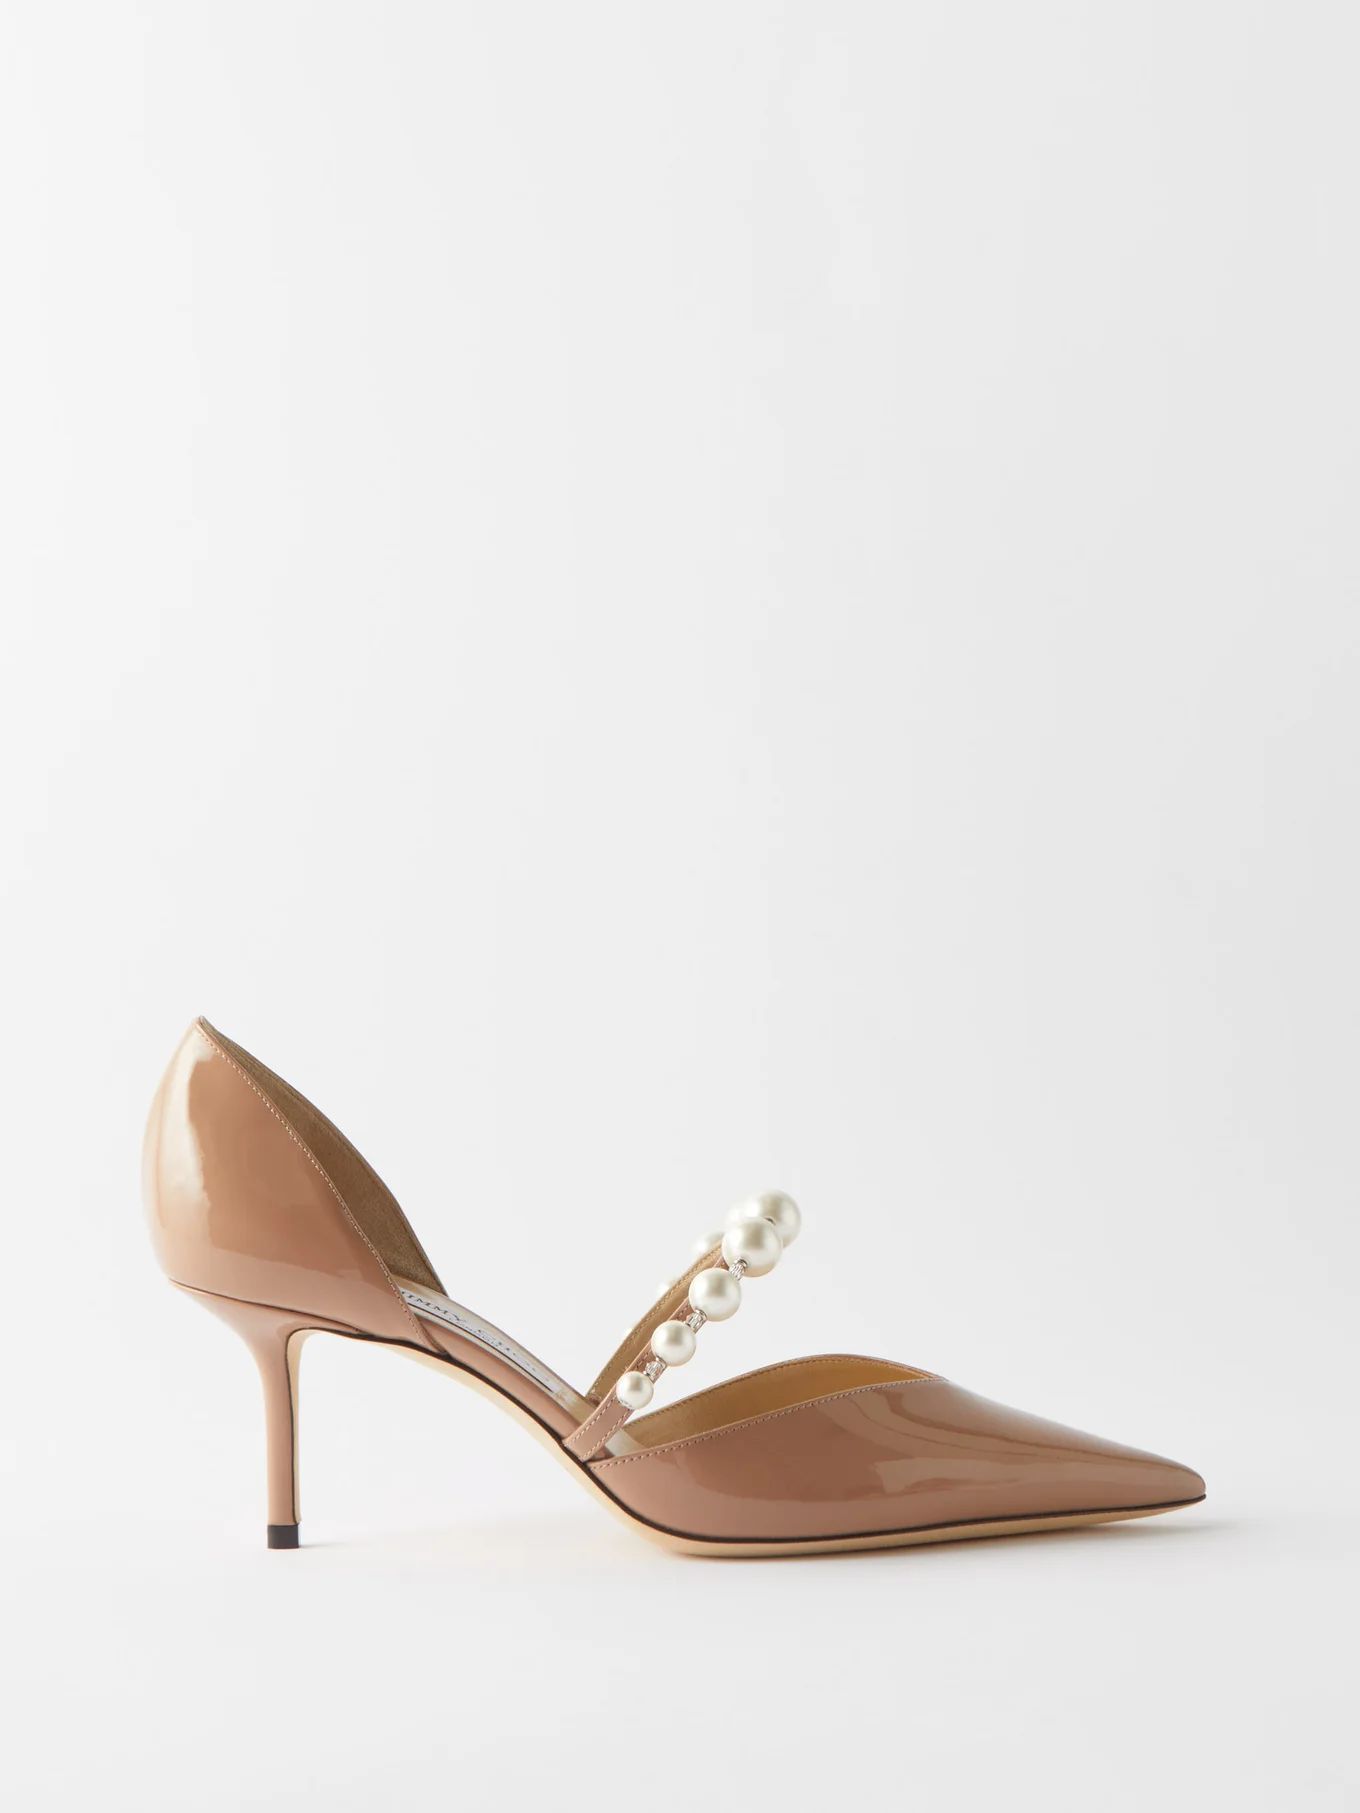 Aurelie 65 pearl-embellished patent-leather pumps | Jimmy Choo | Matches (US)